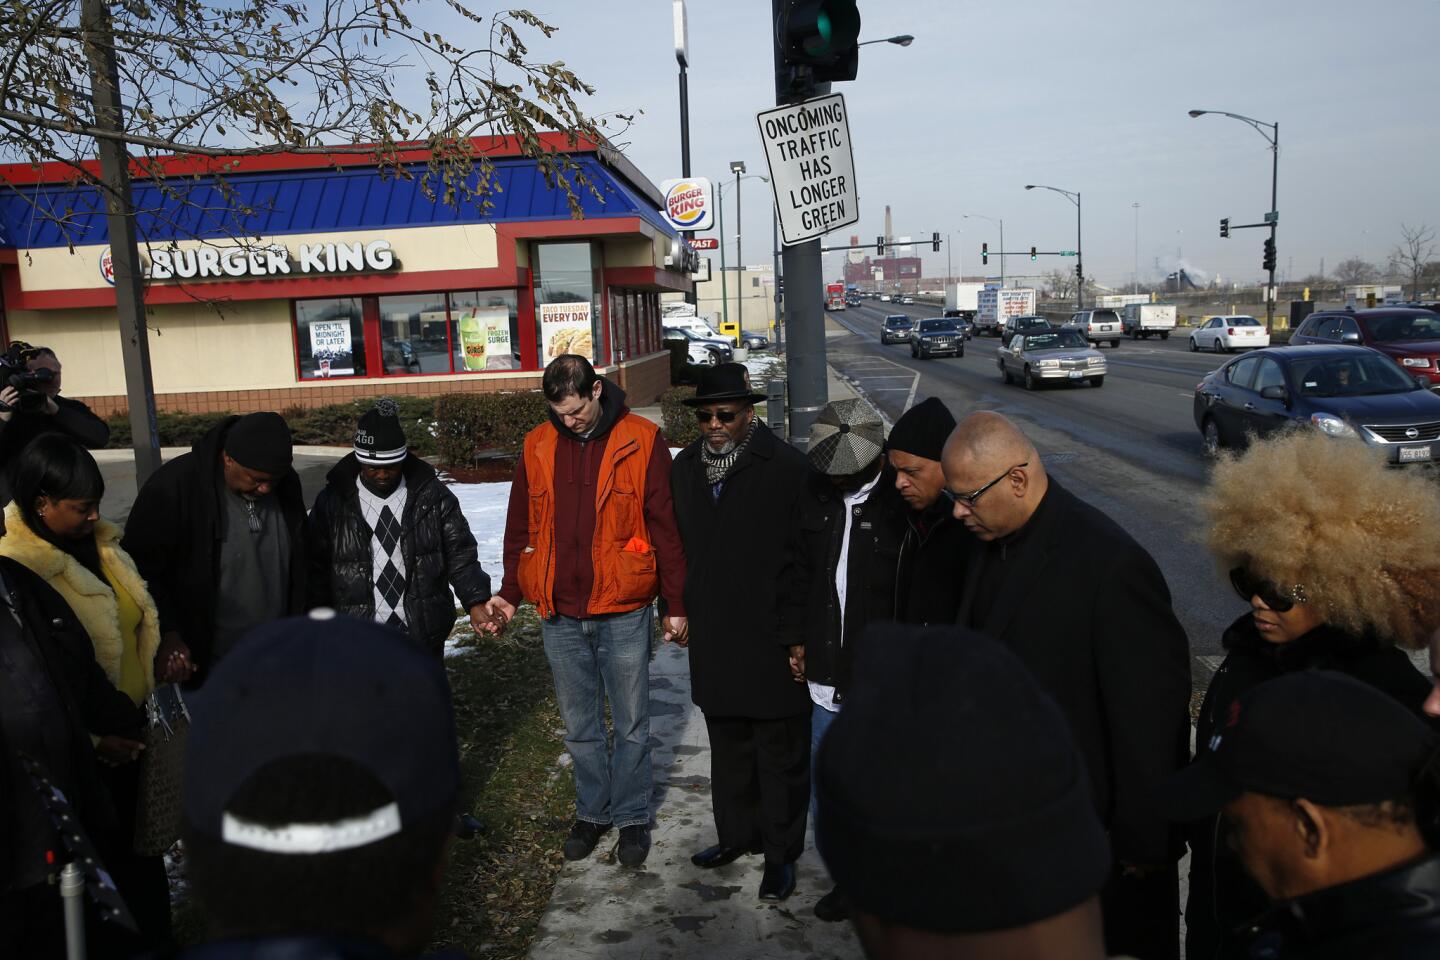 Community activists and residents gather to pay tribute to Laquan McDonald on Nov. 24, 2015, near the scene of his October 2014 death at 41st Street and Pulaski Road in Chicago.